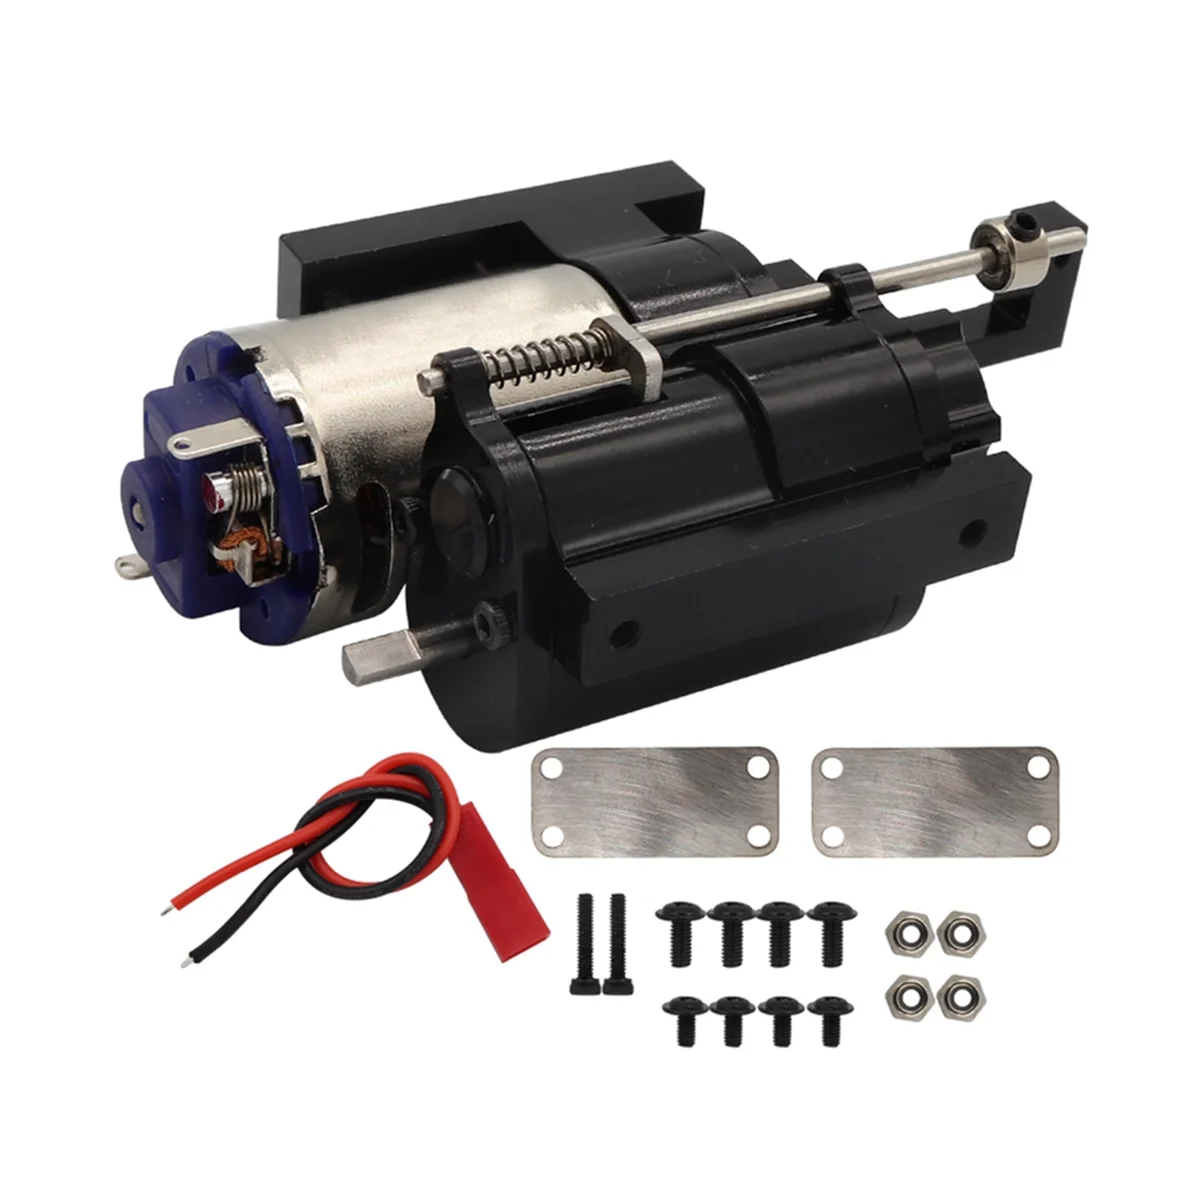 

Metal 2 Speed Transmission Gearbox for WPL C14 C24 B14 B24 MN D90 MN-90 MN98 MN99S RC Car Upgrades Parts,Black